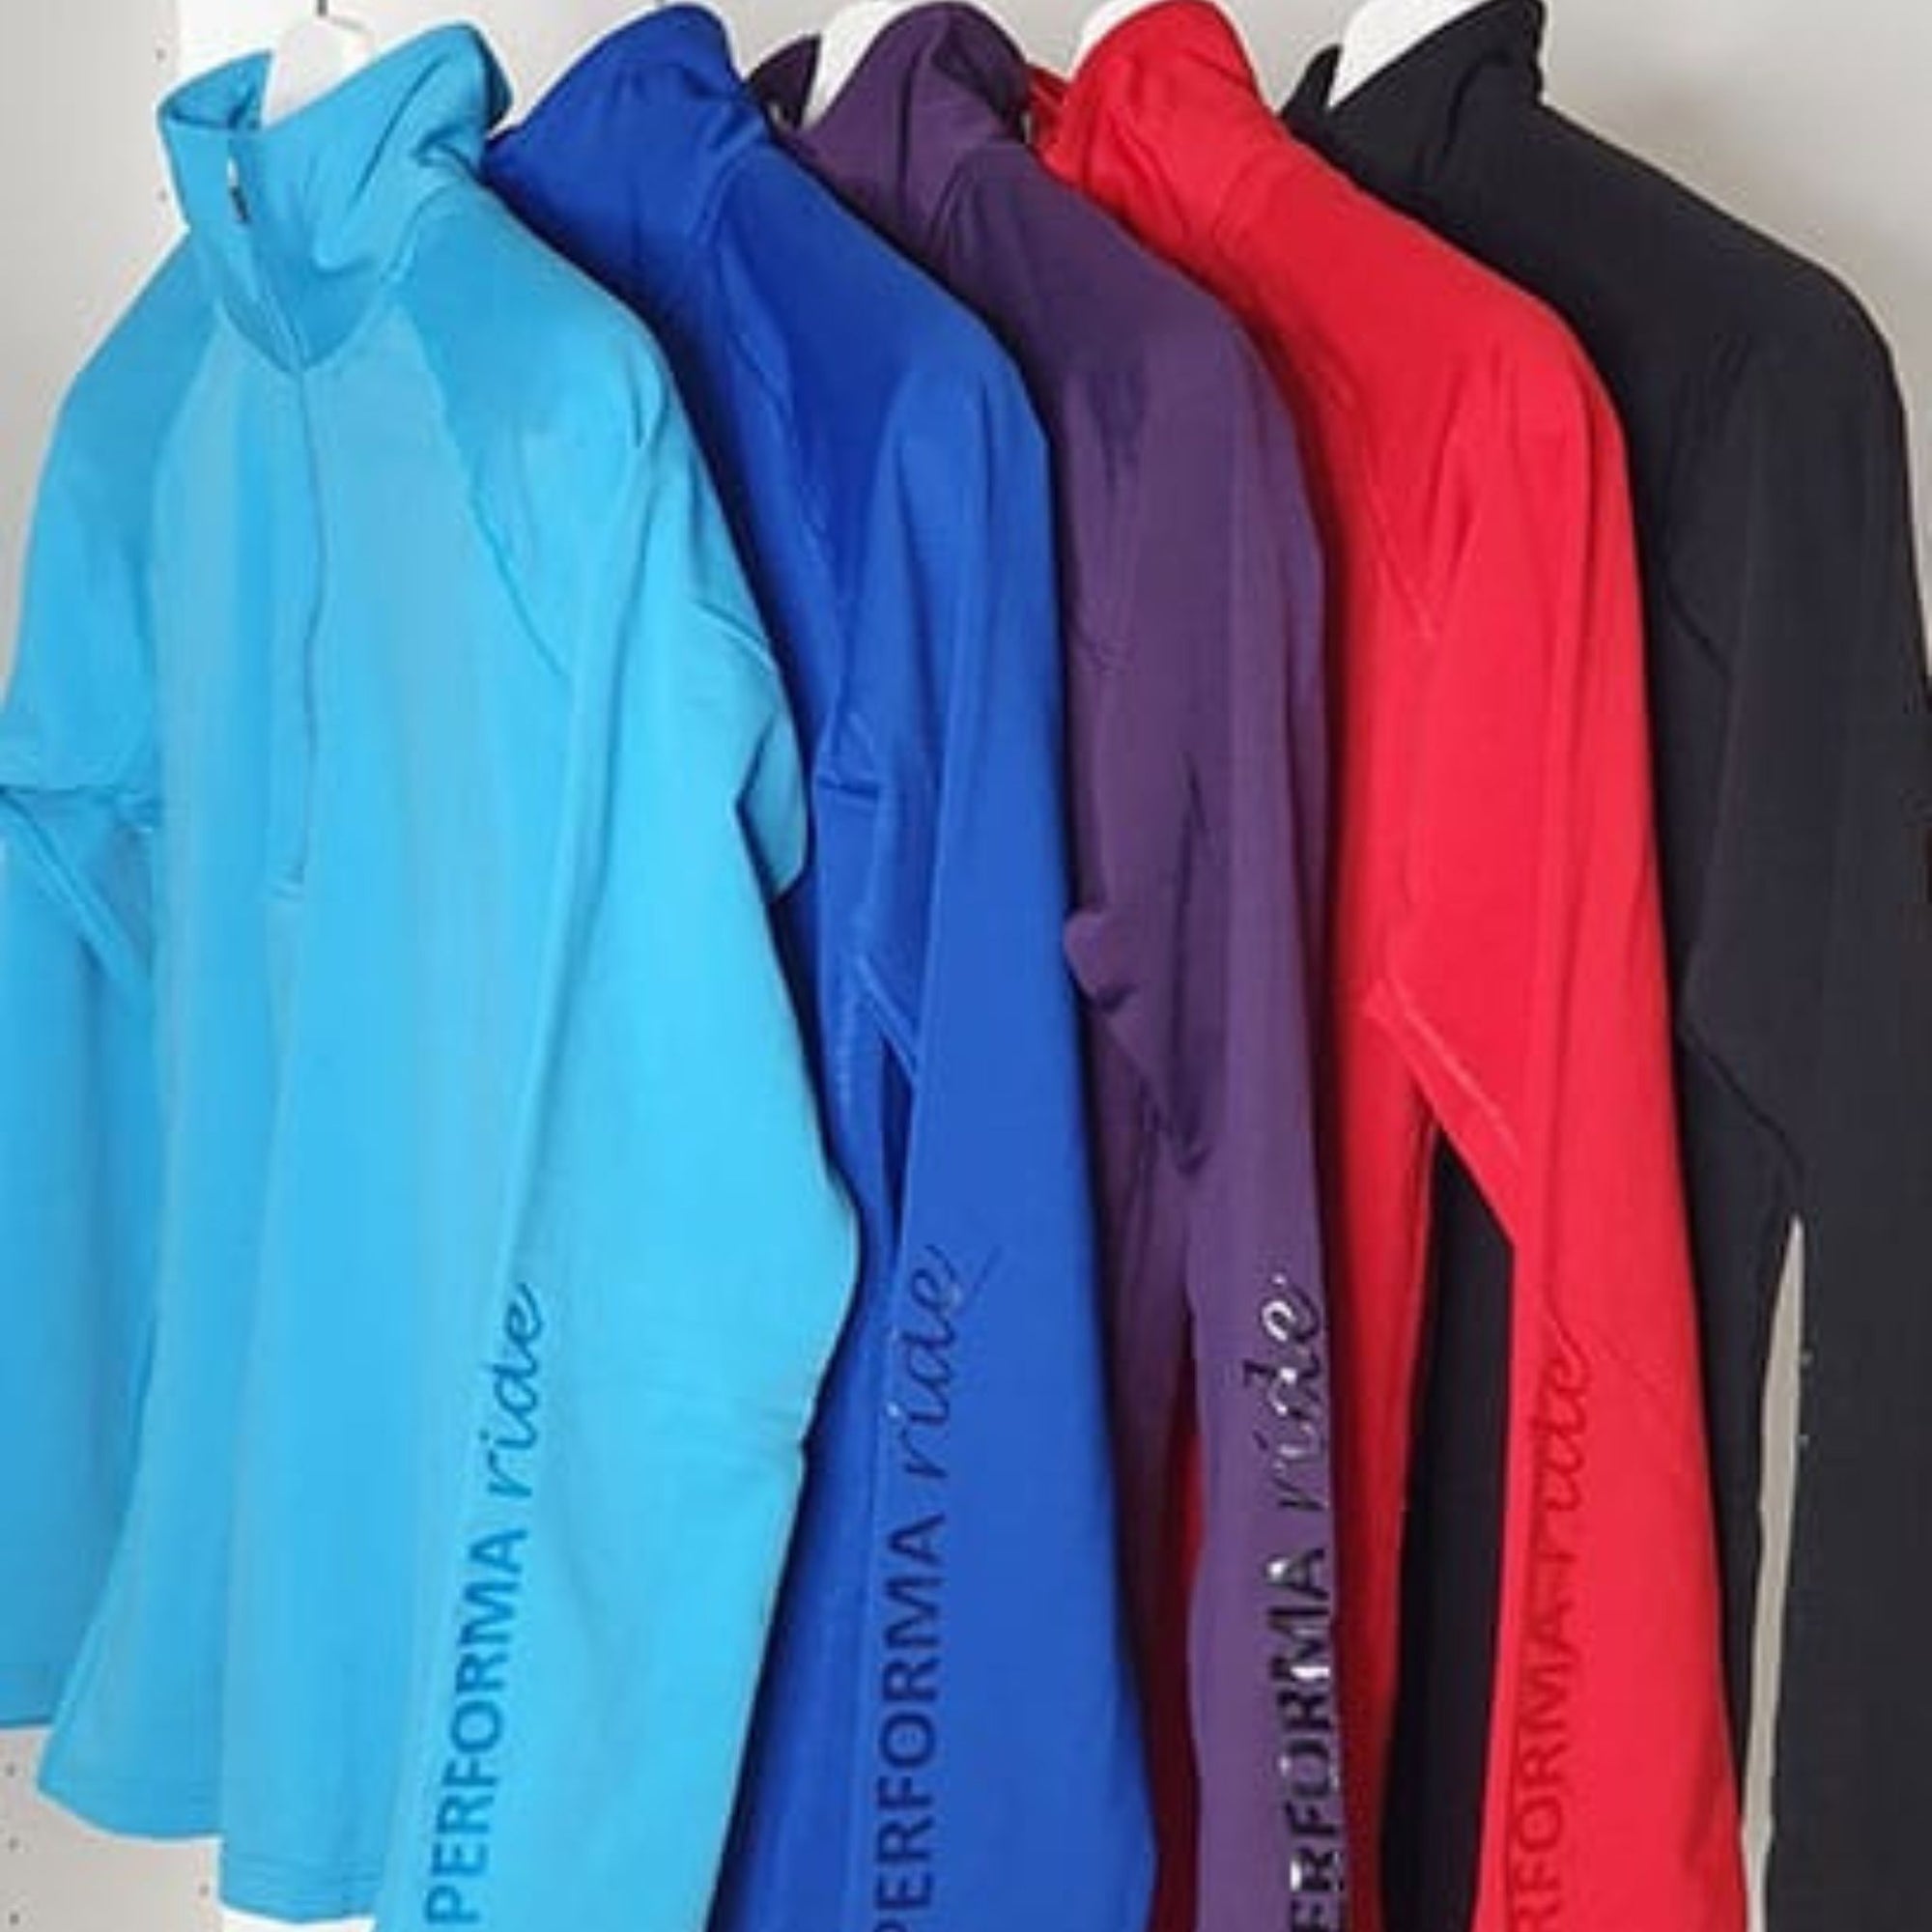 Light blue, royal blue, purple, red and black winter riding tops with performa ride logo on sleeve.